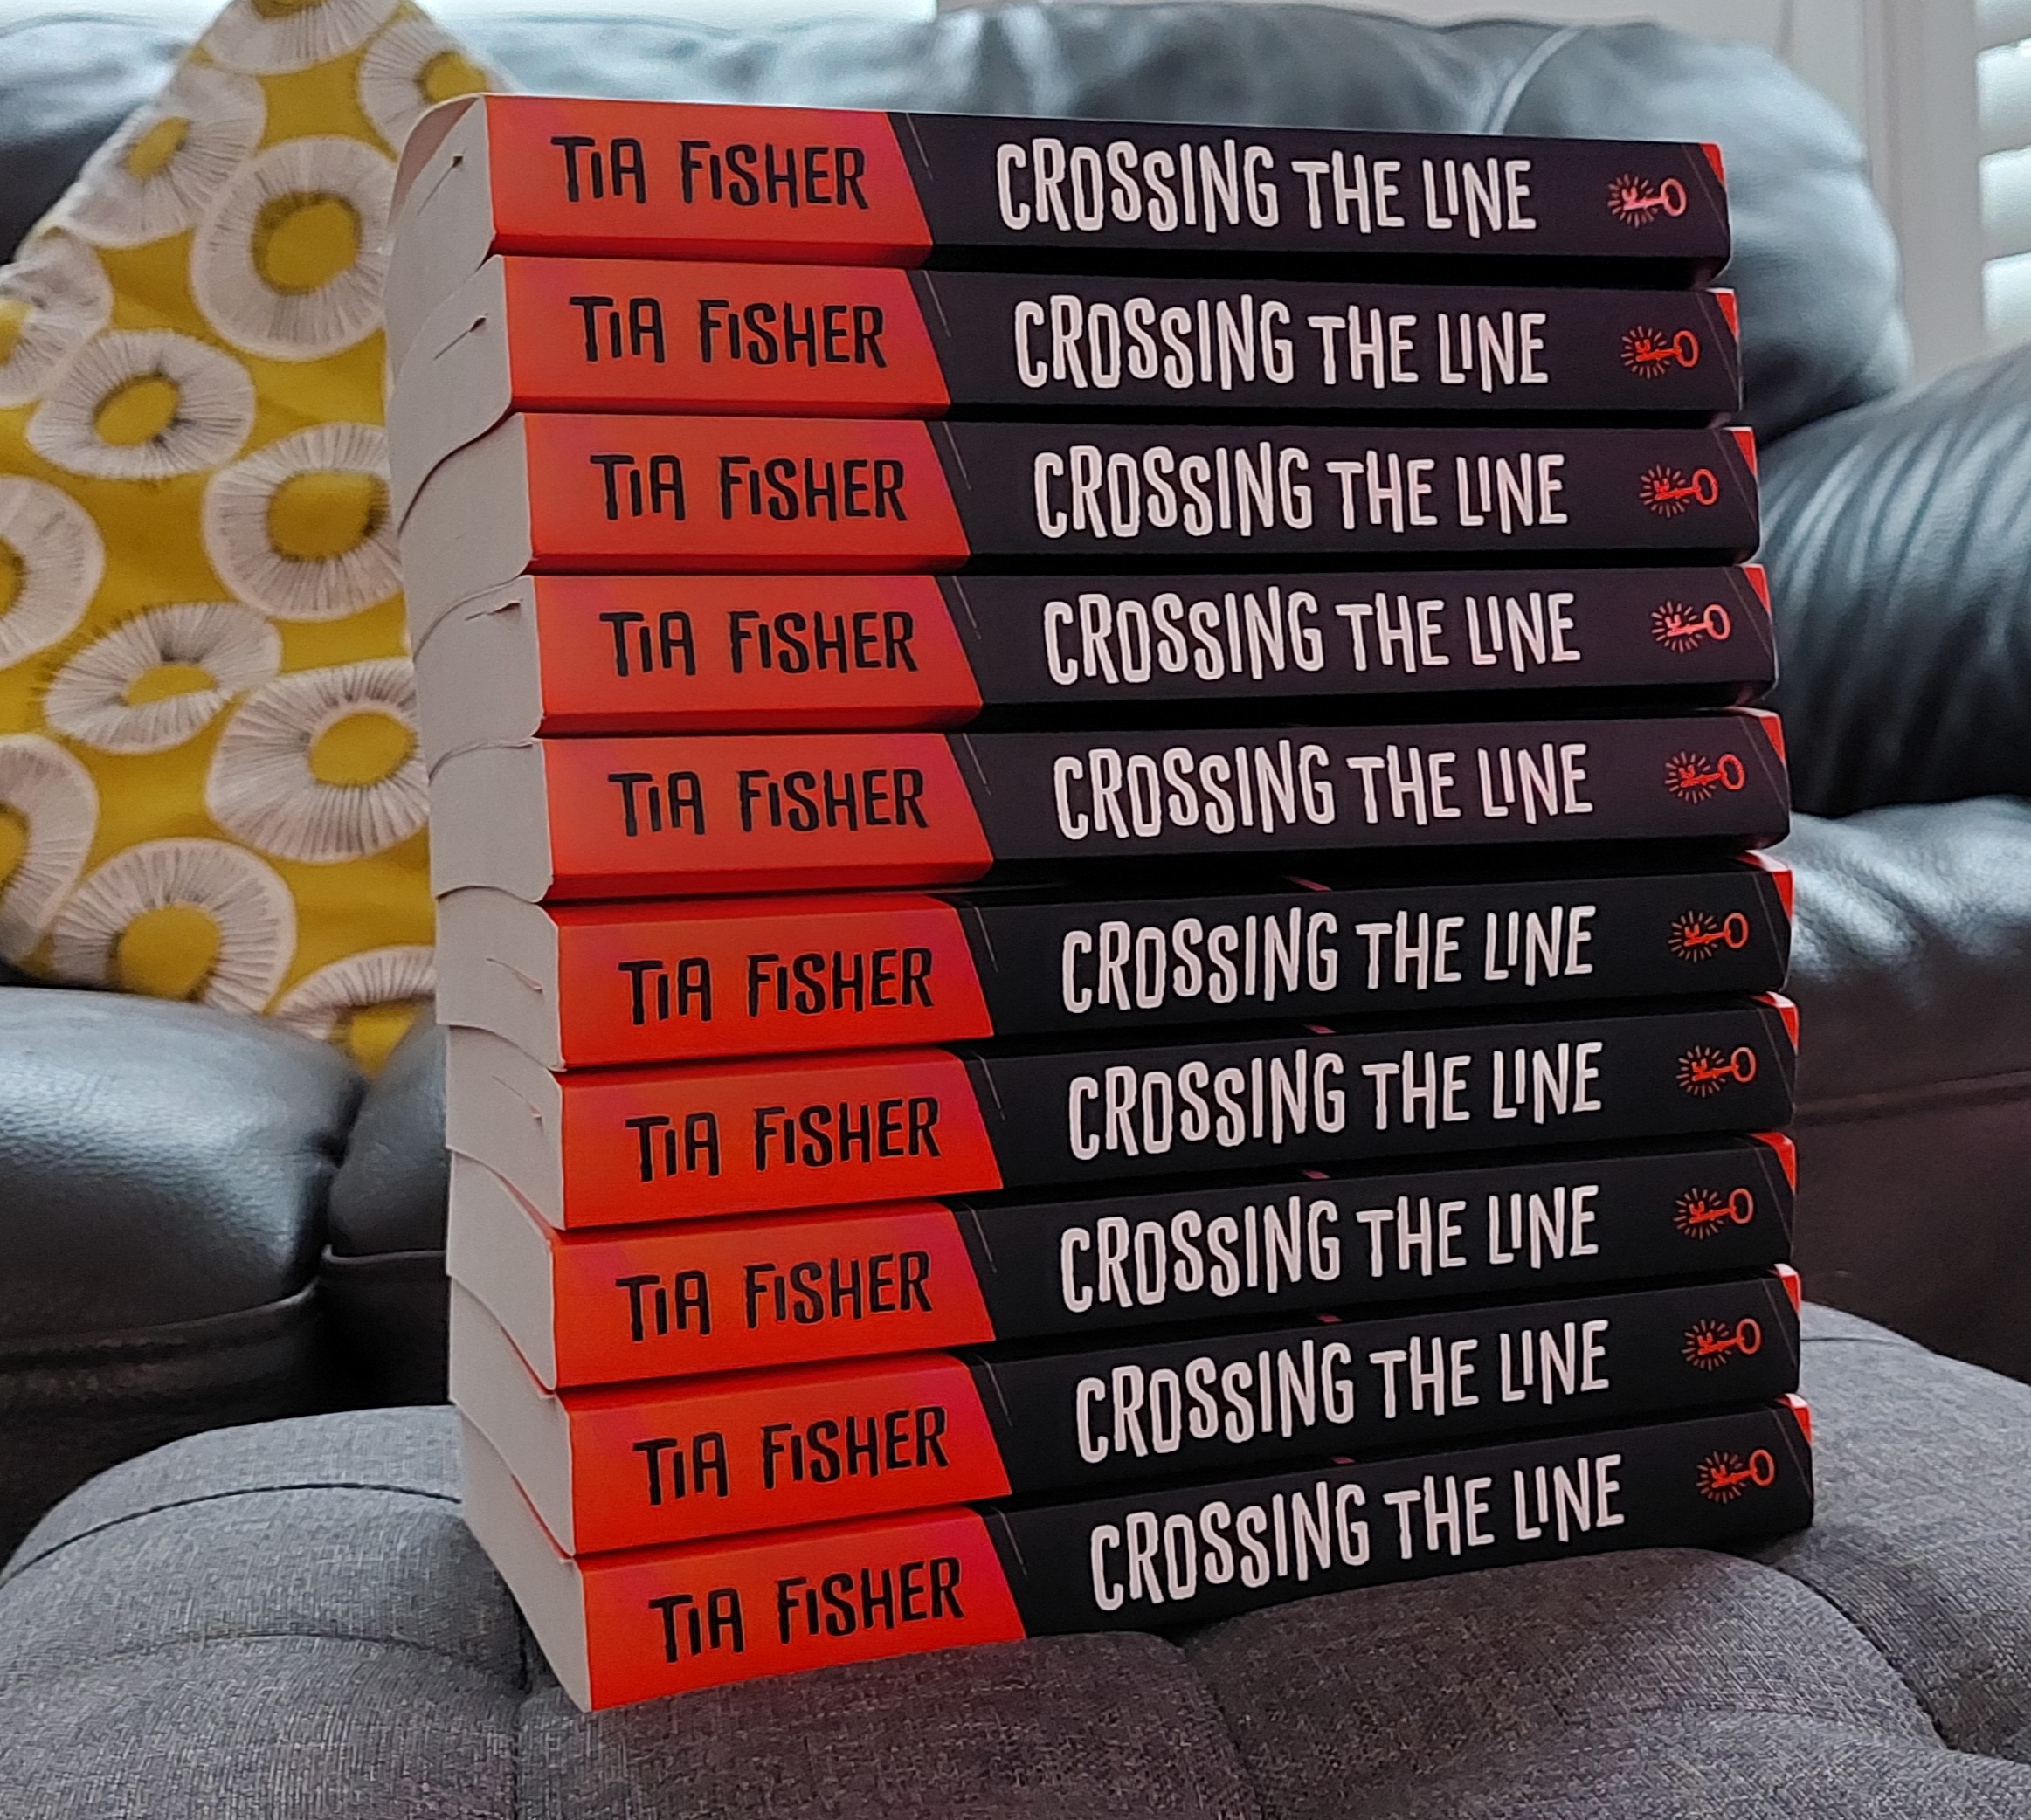 Win one of ten copies of Crossing the Line by Tia Fisher